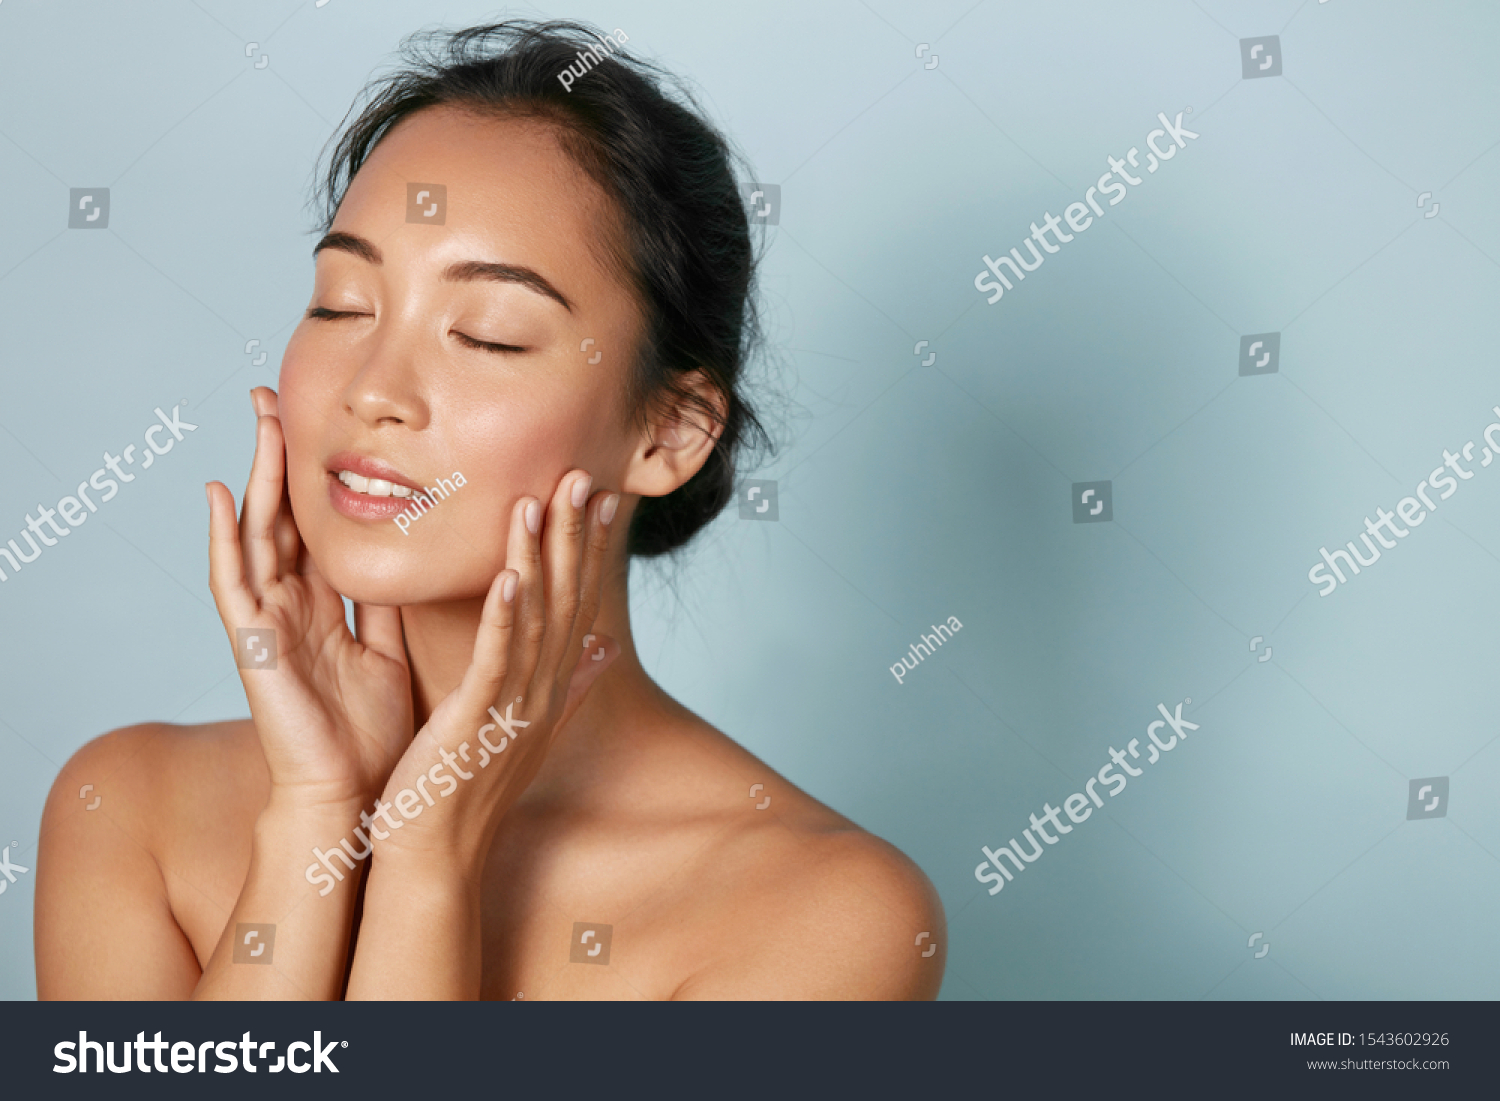 Skin care. Woman with beauty face and healthy facial skin portrait. Beautiful asian girl model with natural makeup touching glowing hydrated skin on blue background closeup. High quality image